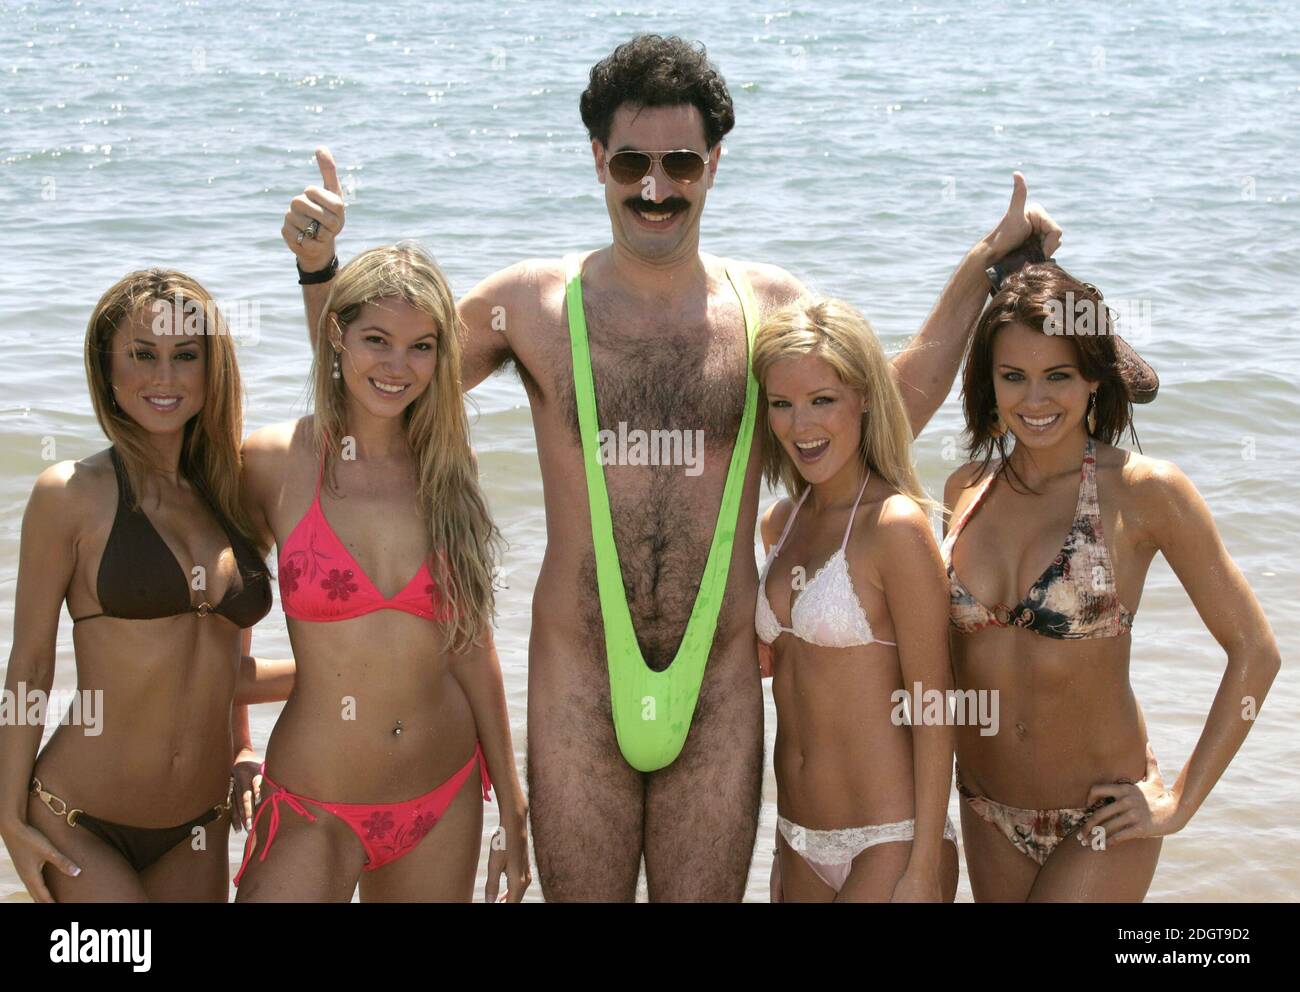 Borat complete with thong and girls Stock Photo - Alamy